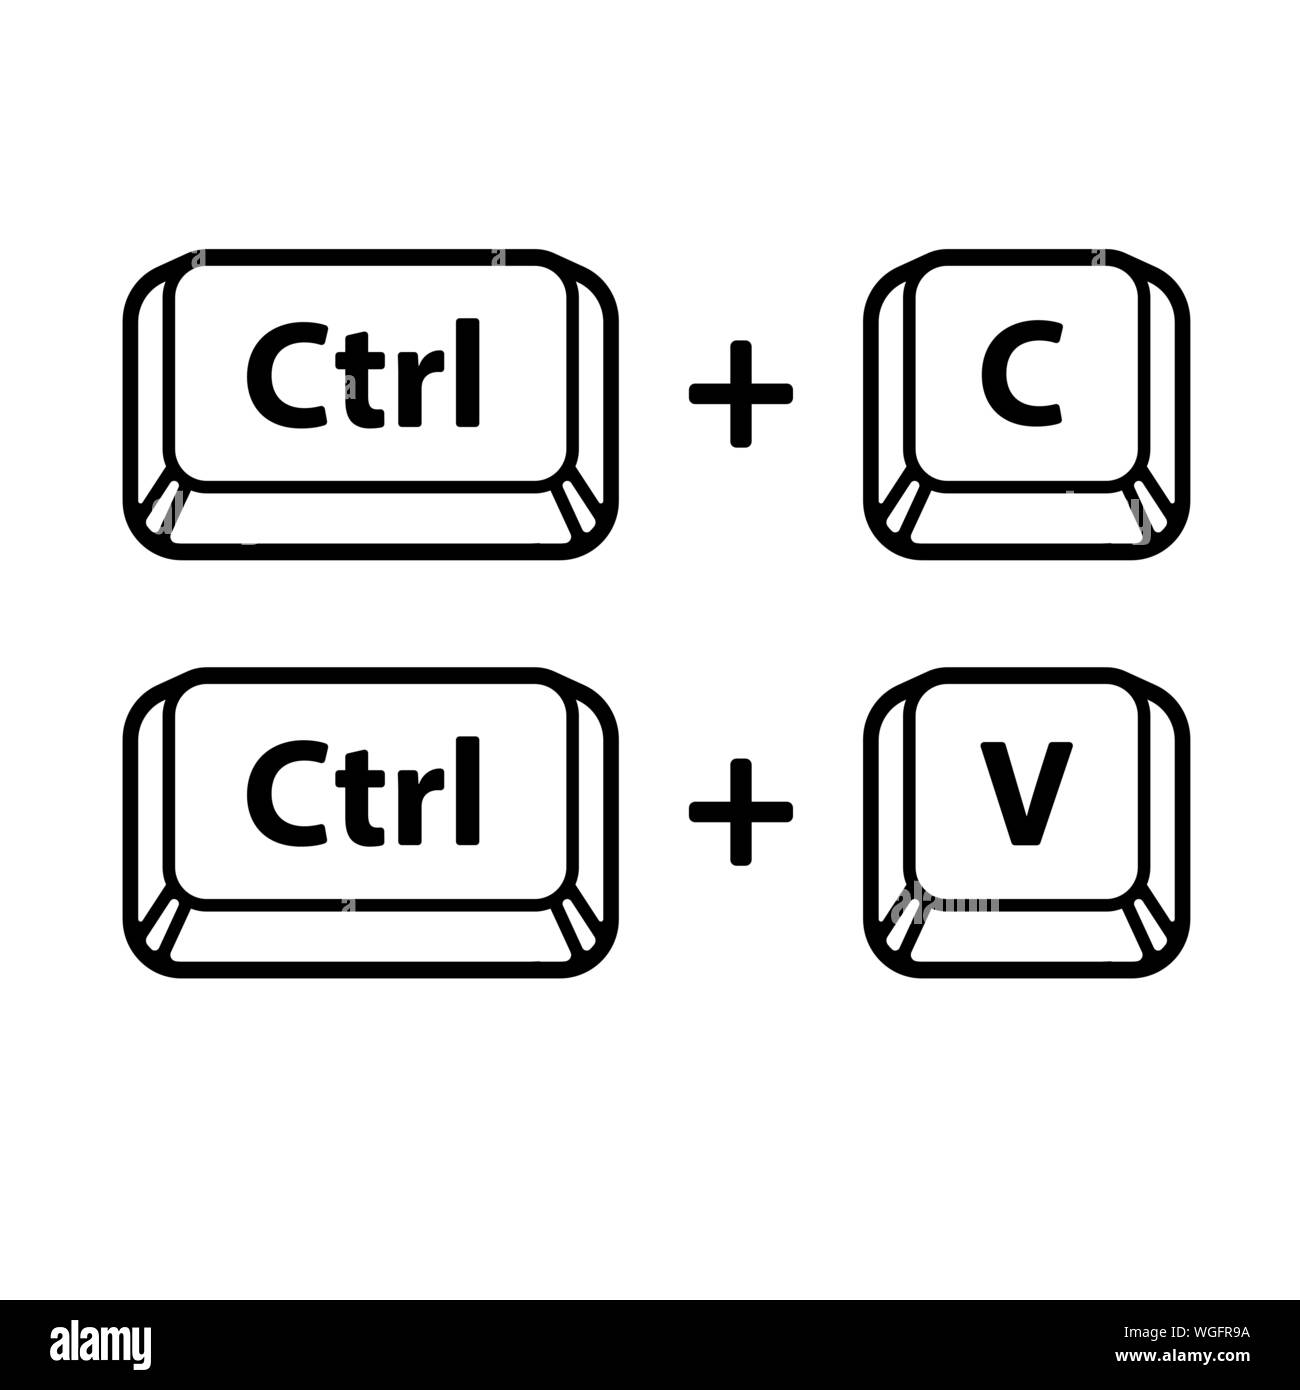 Ctrl C Ctrl V Keyboard Buttons Copy And Paste Key Shortcut Black And